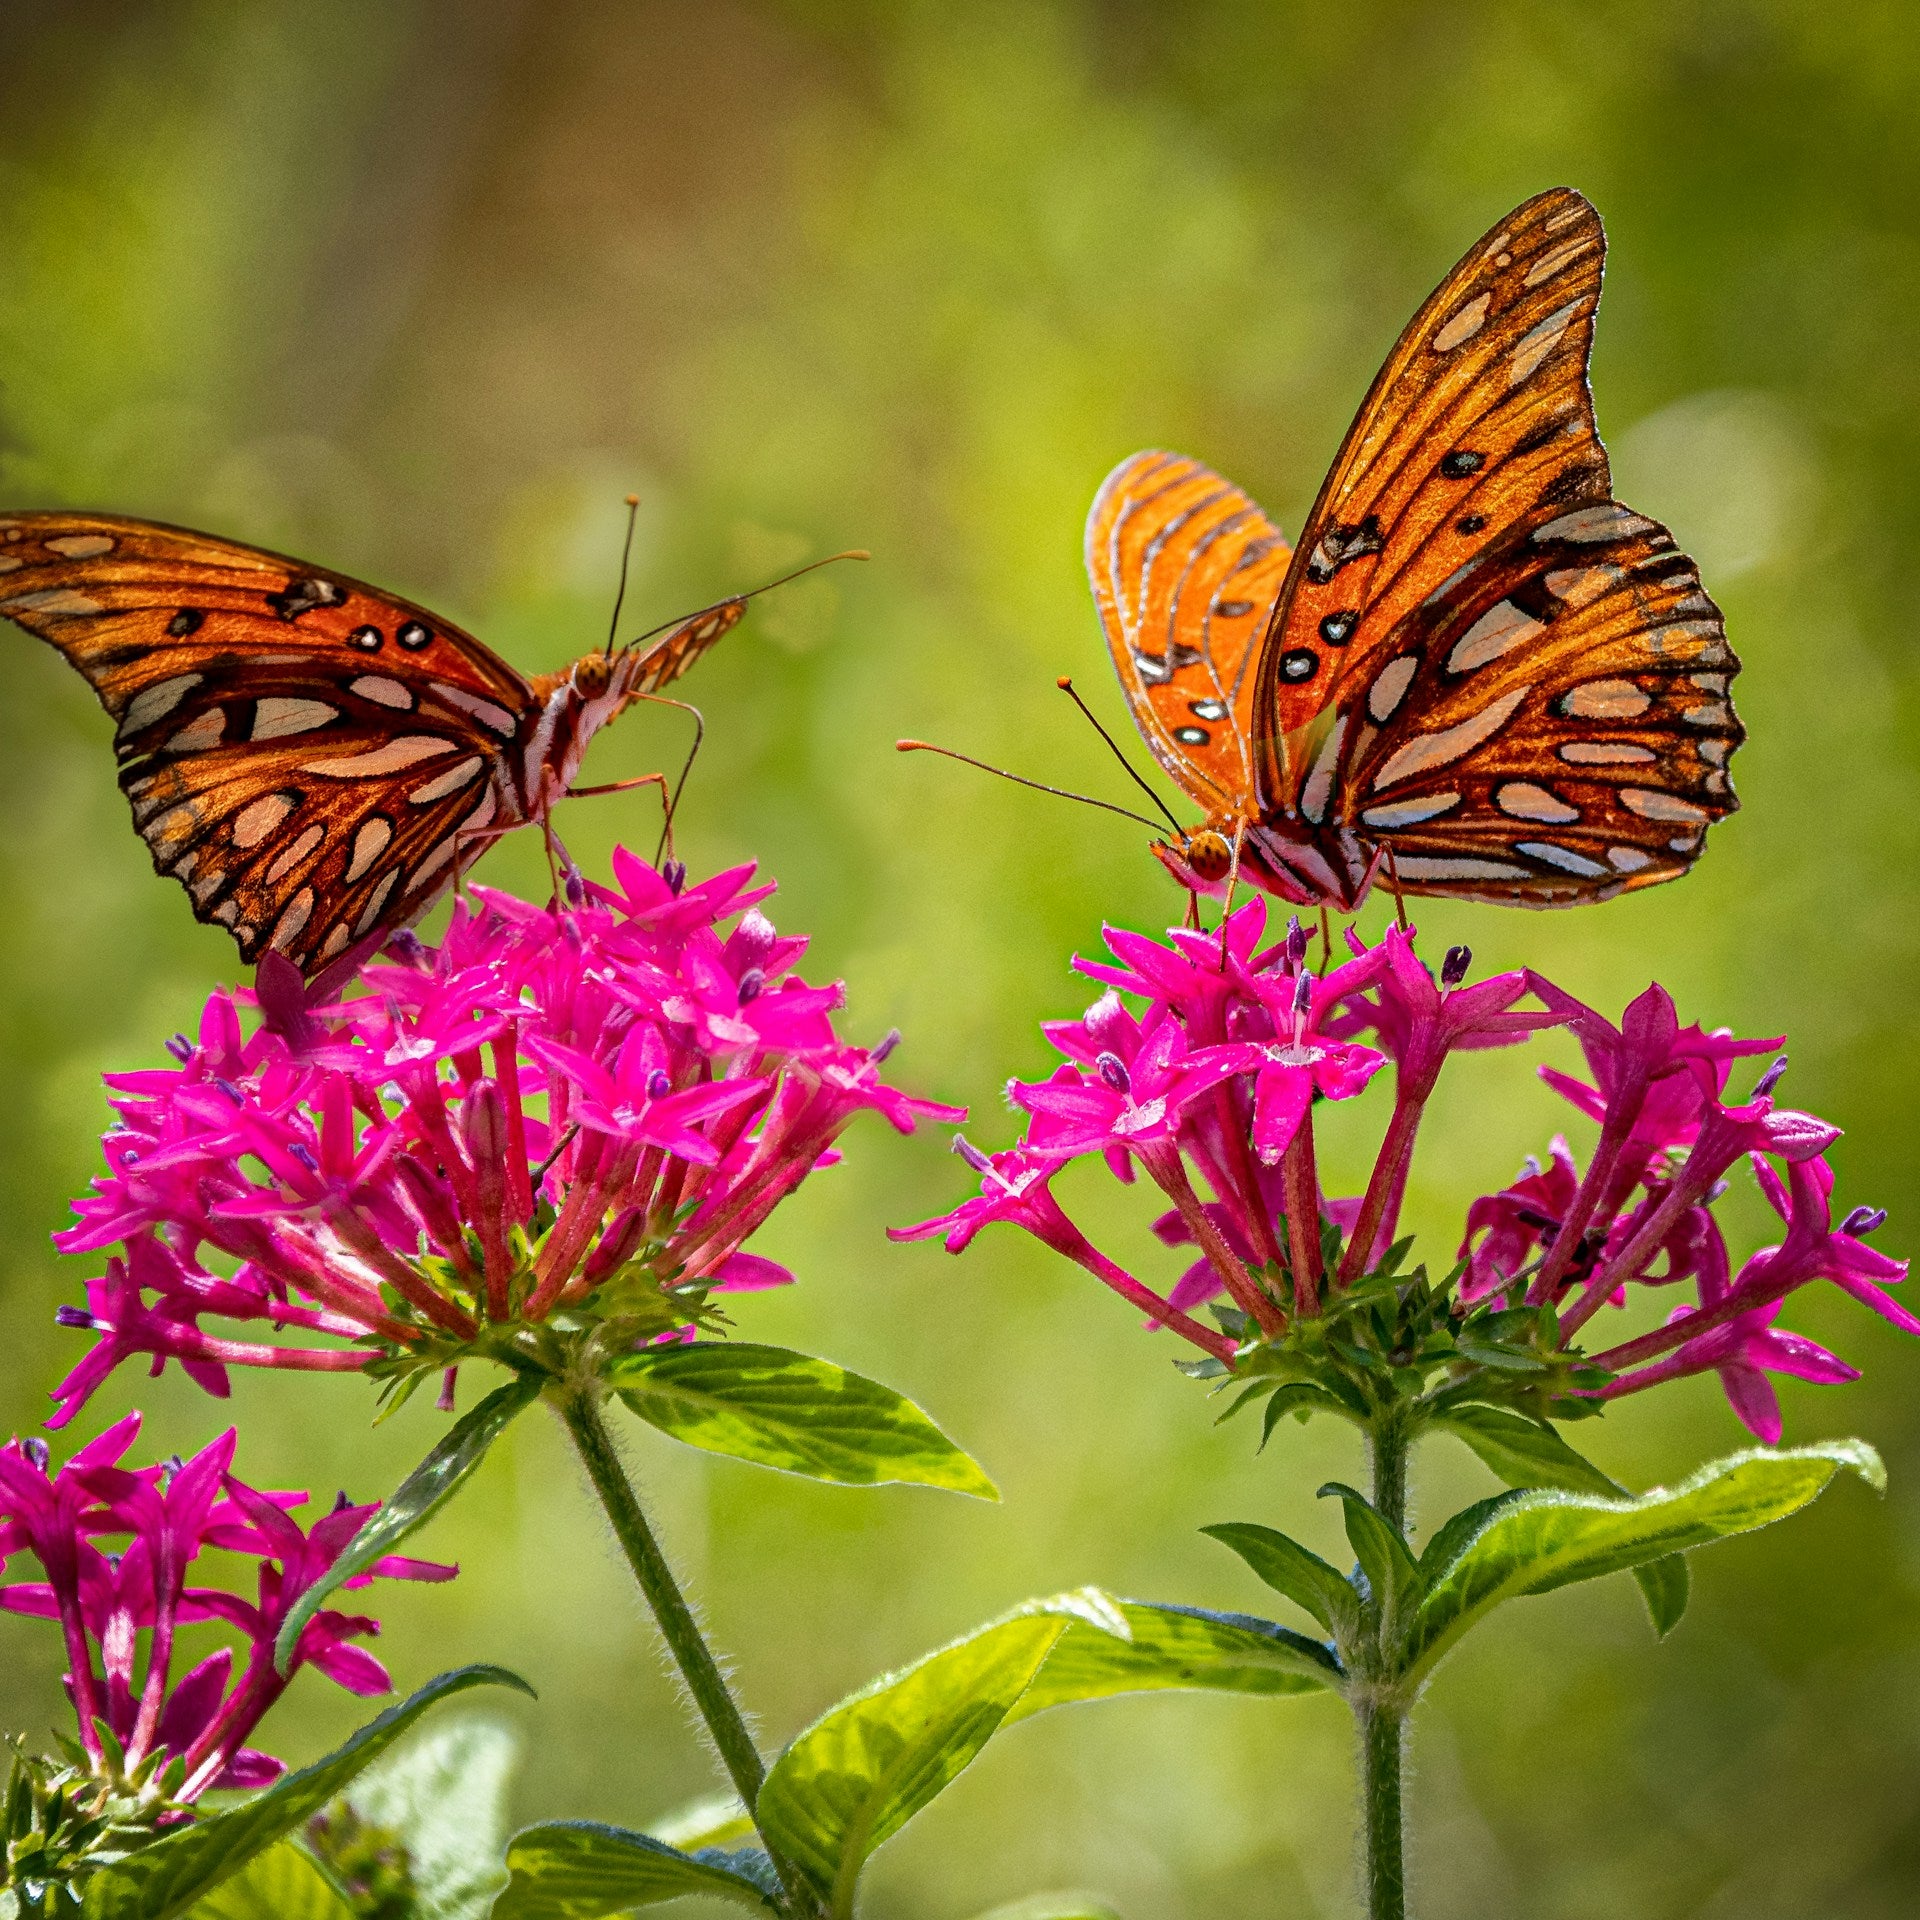 Two monarch butterflies pollinating bright pink honeysuckle flowers